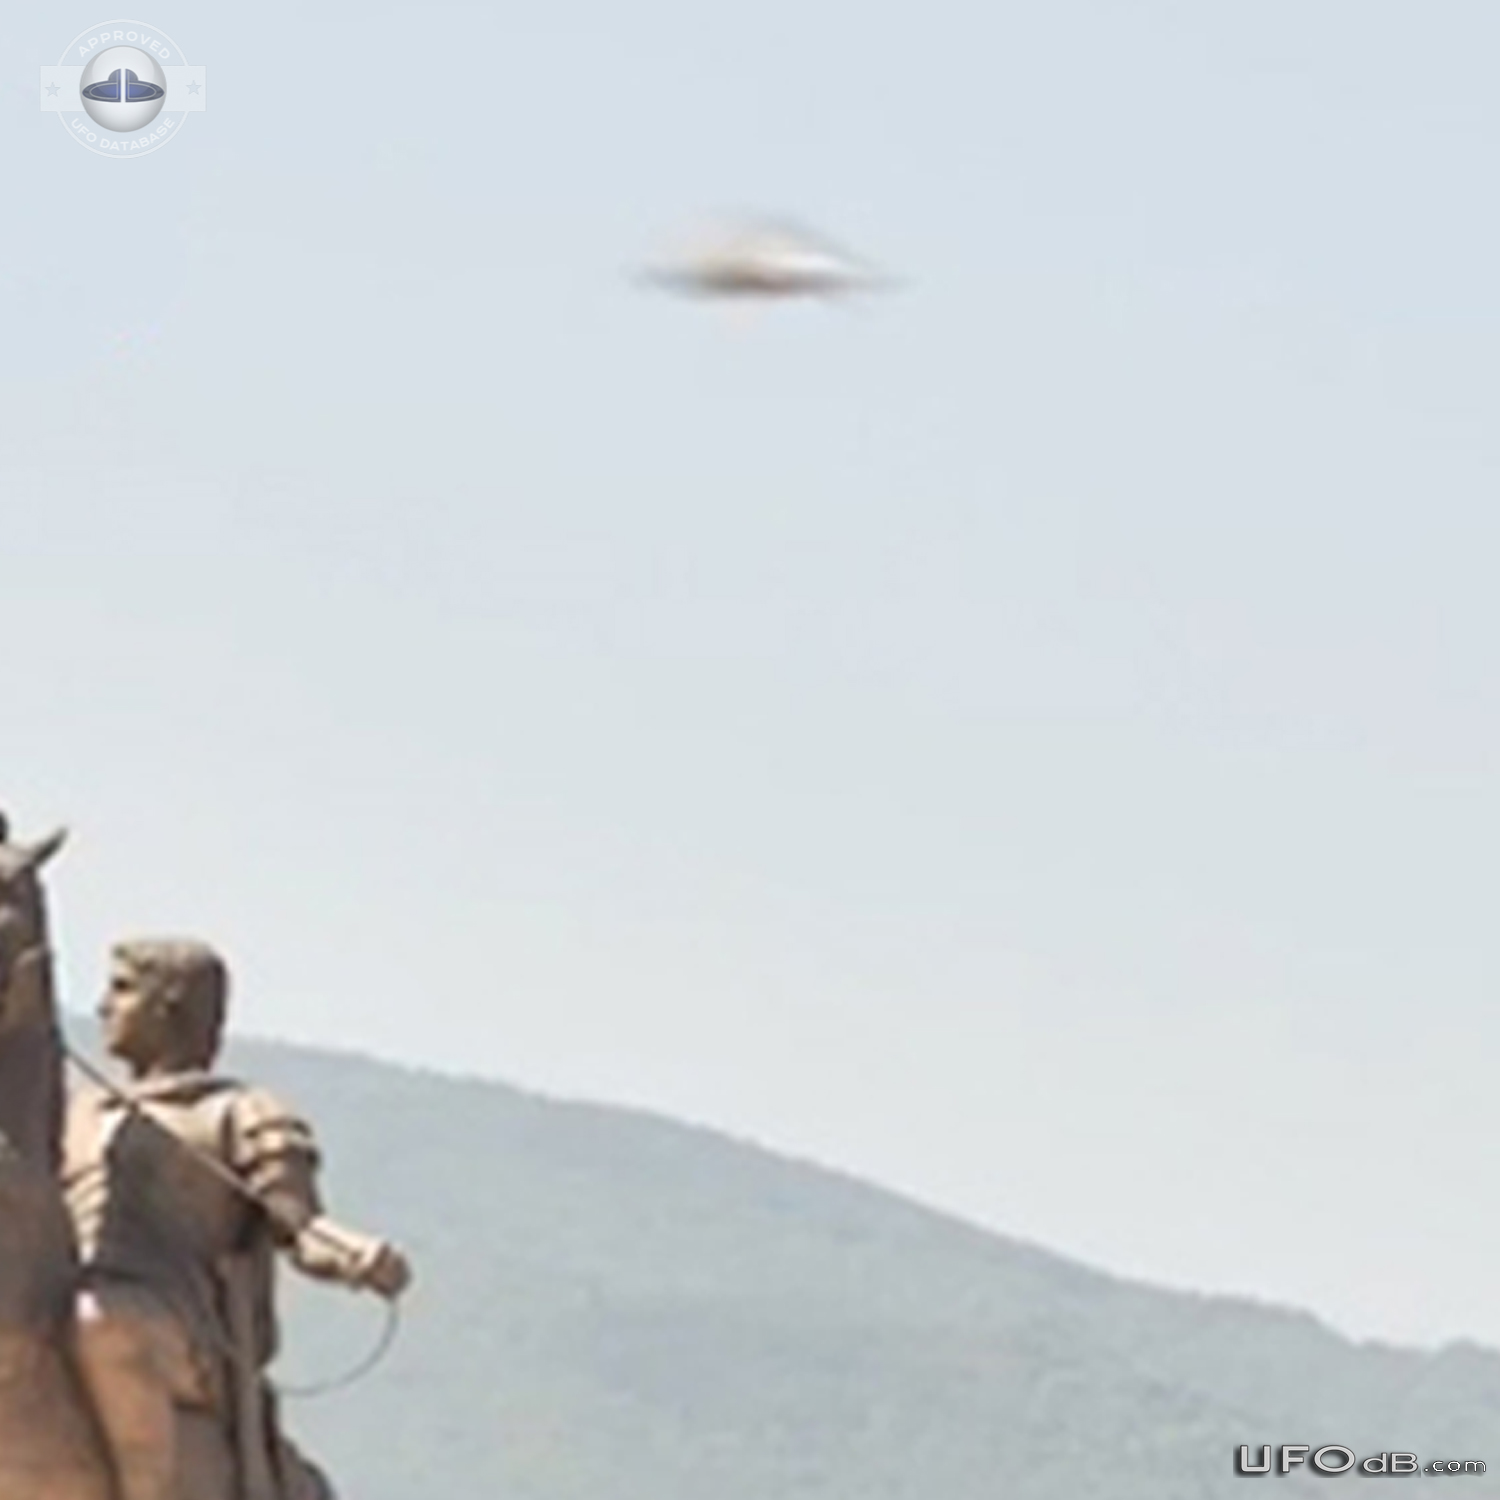 Triangular UFO passed over Warrior on a horse statue in Skopje Macedon UFO Picture #847-6